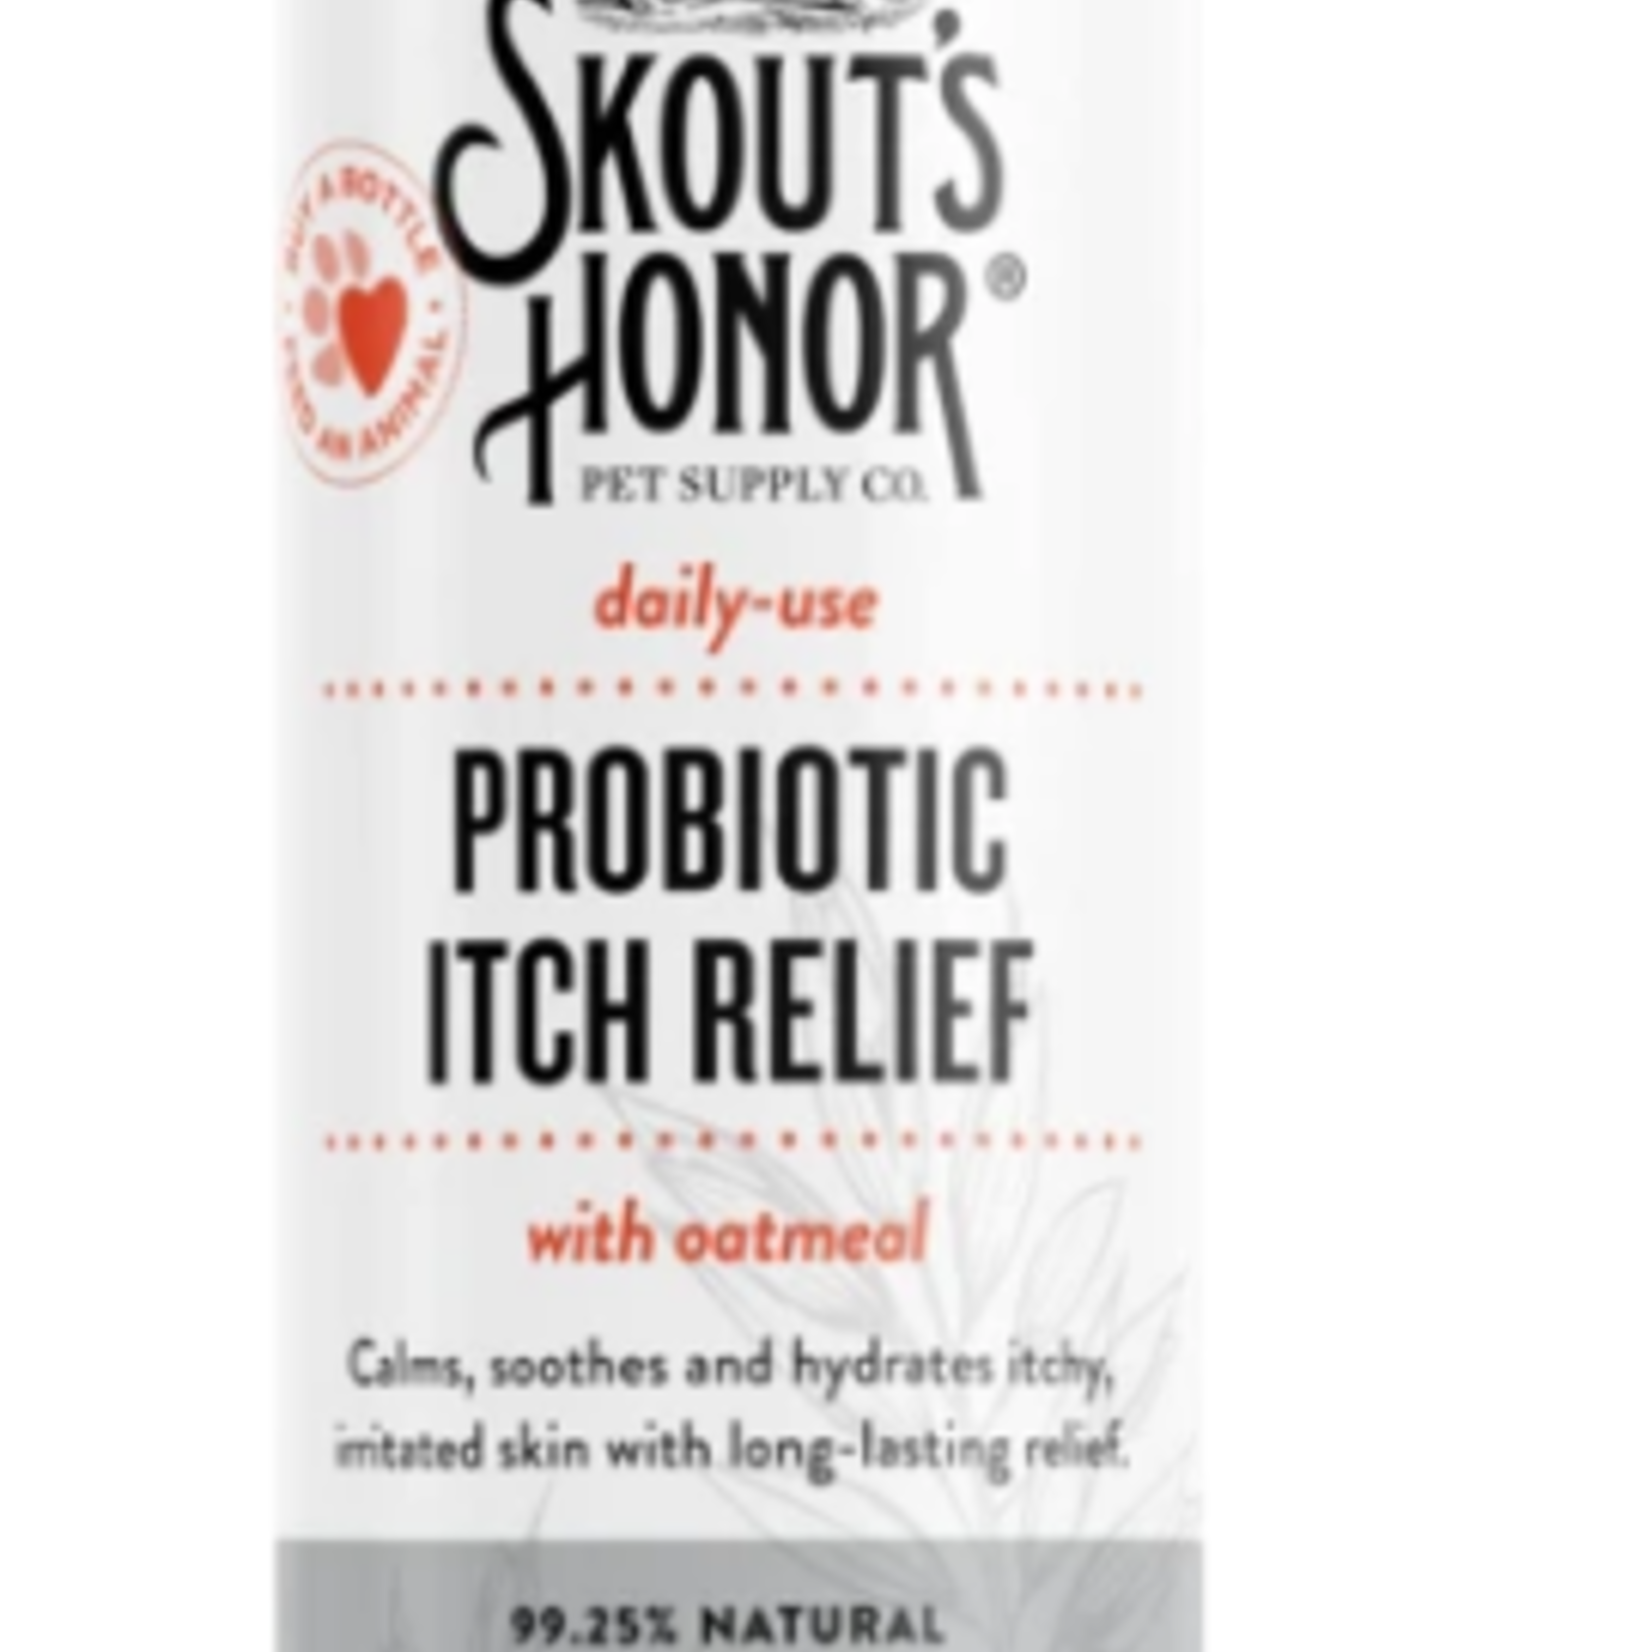 SKOUTS HONOR Anti Itch Relief